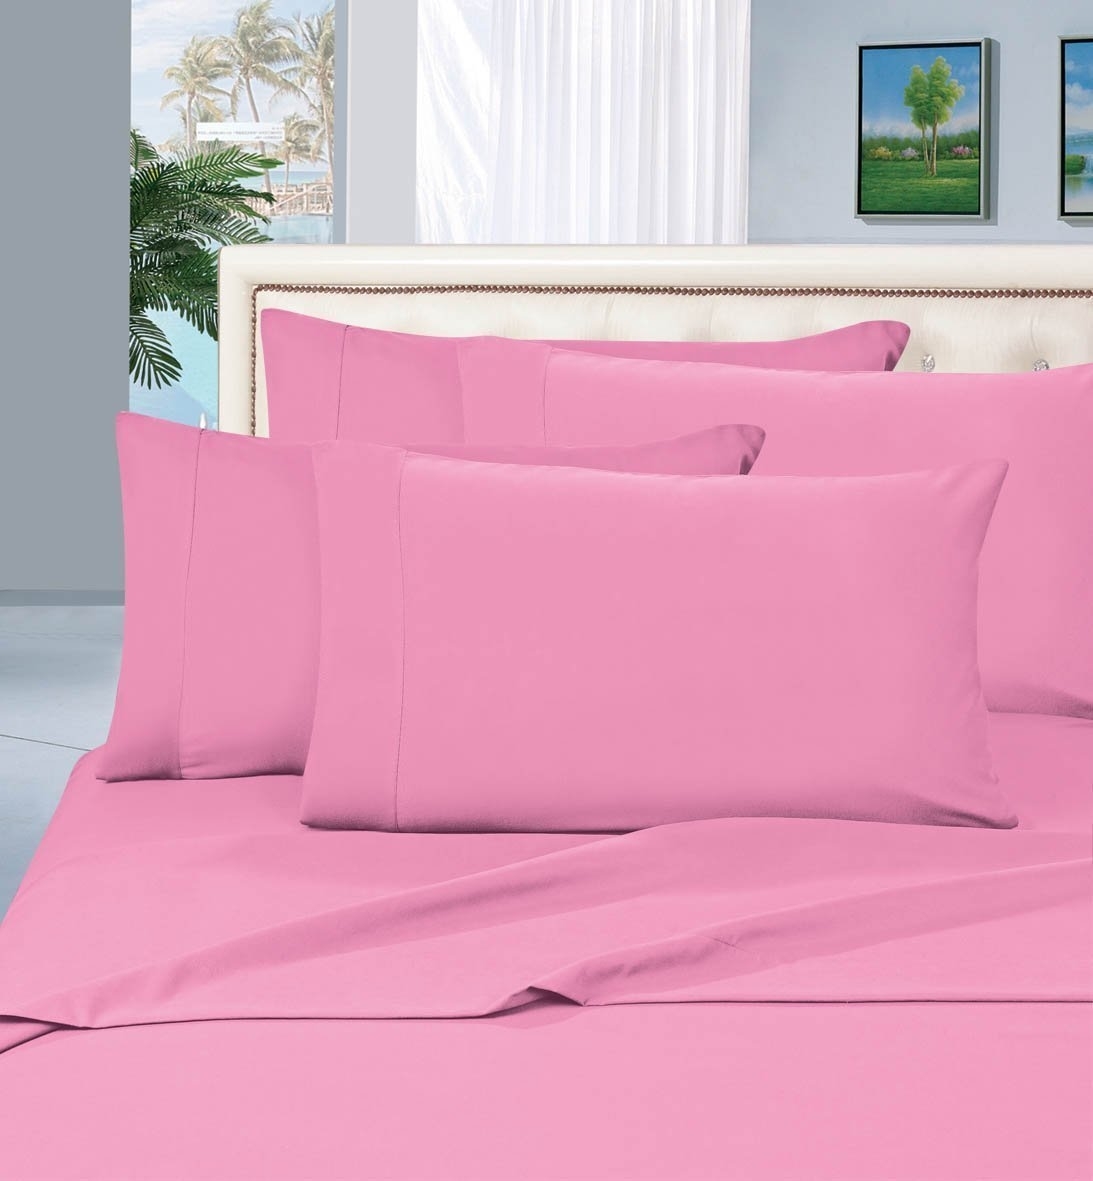 Elegant Comfort 1500 Series Wrinkle Resistant Egyptian Quality Hypoallergenic Ultra Soft Luxury 4-piece Bed Sheet Set, King, Light Pink